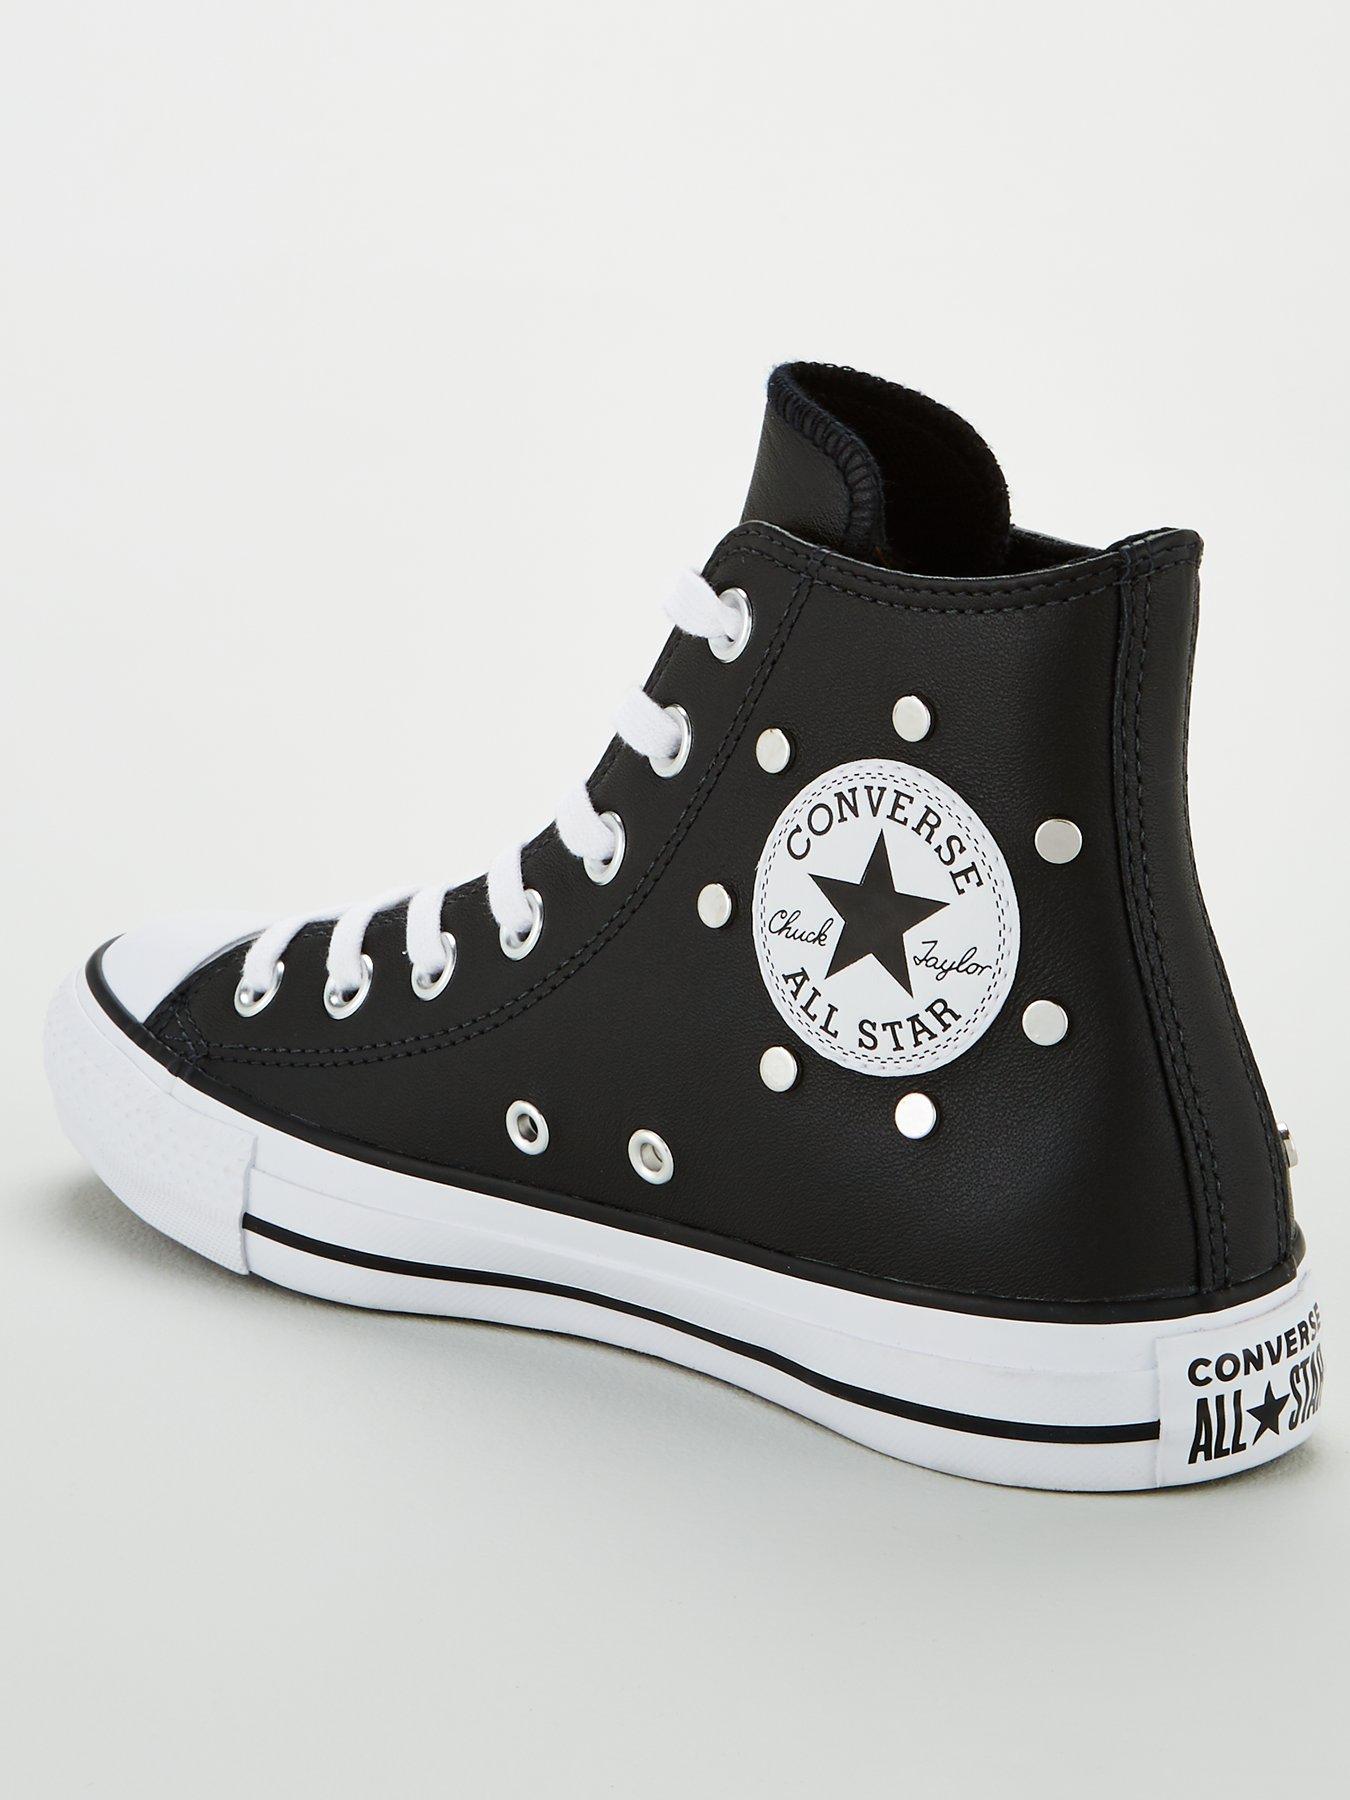 silver leather converse uk